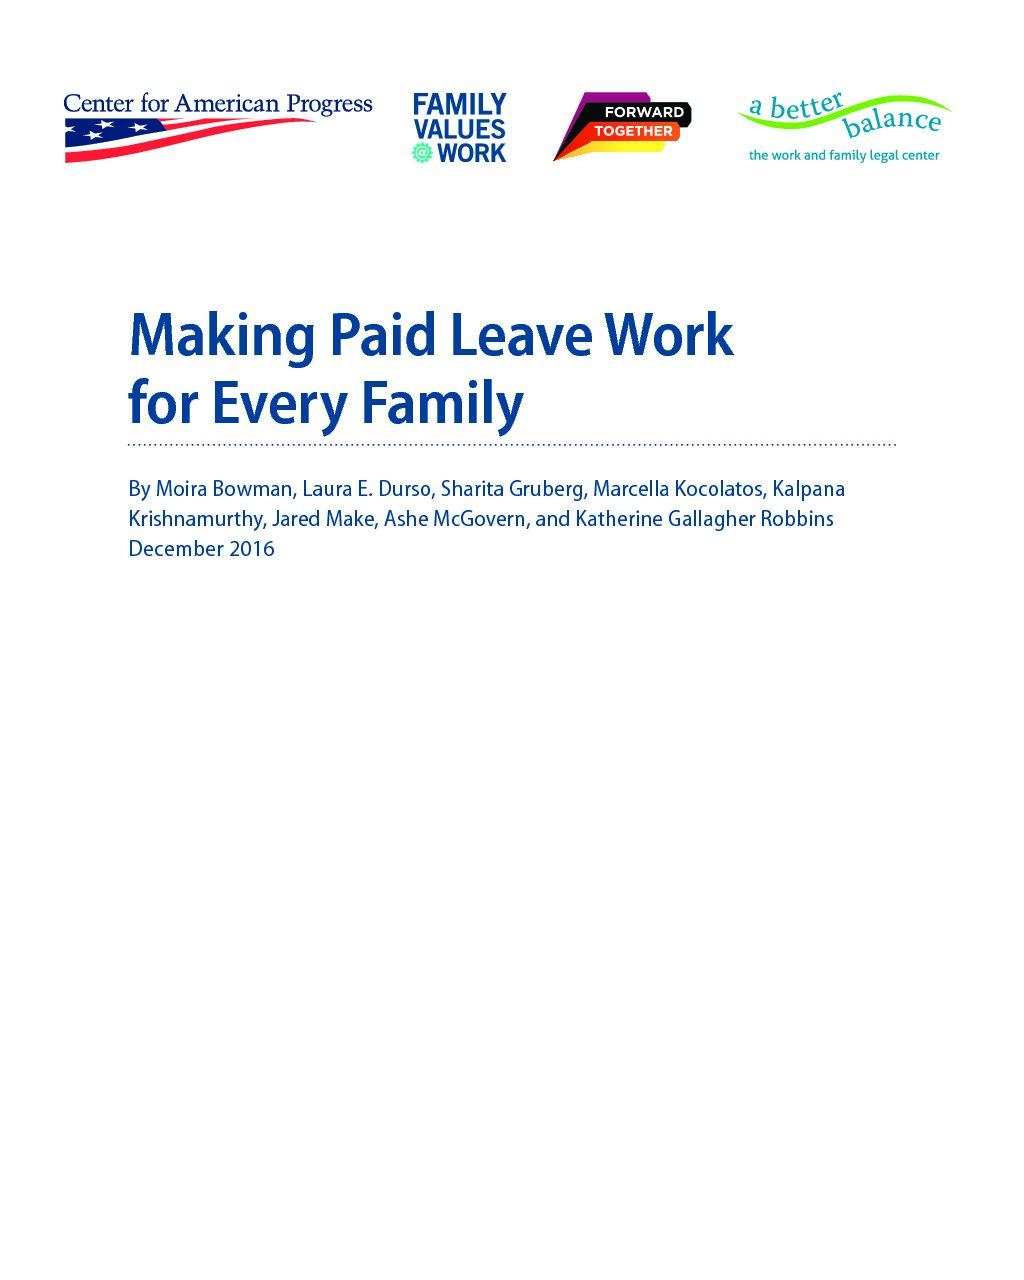 Making Paid Leave Work for All Families